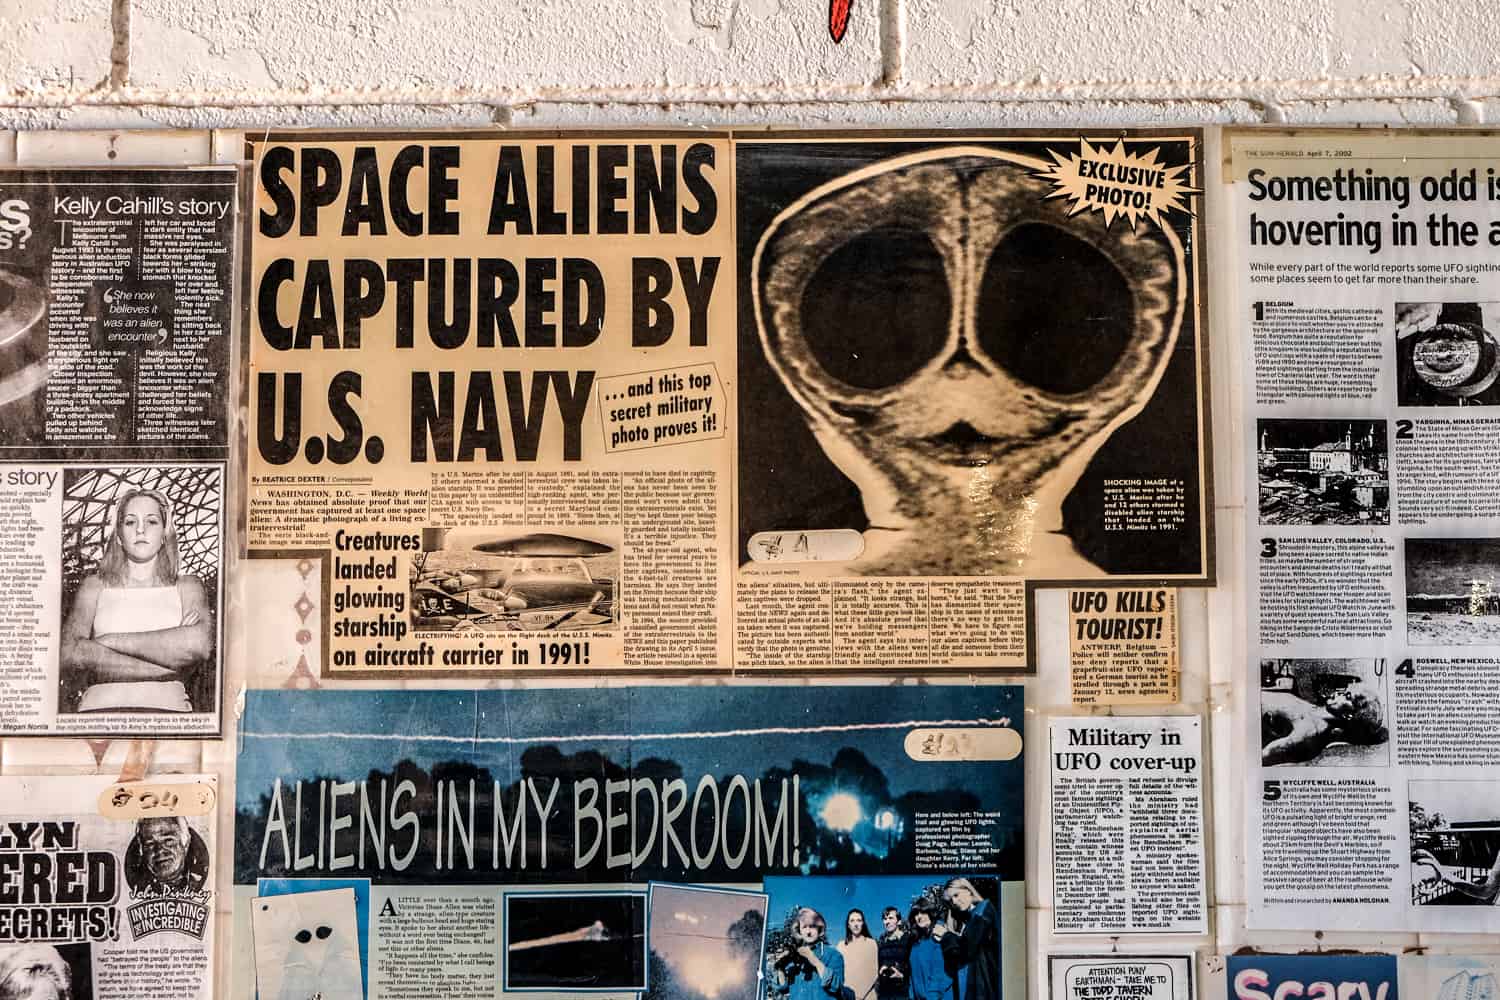 News clippings of alien sightings in Wycliffe Well cafe in the Northern Territory, Australia.